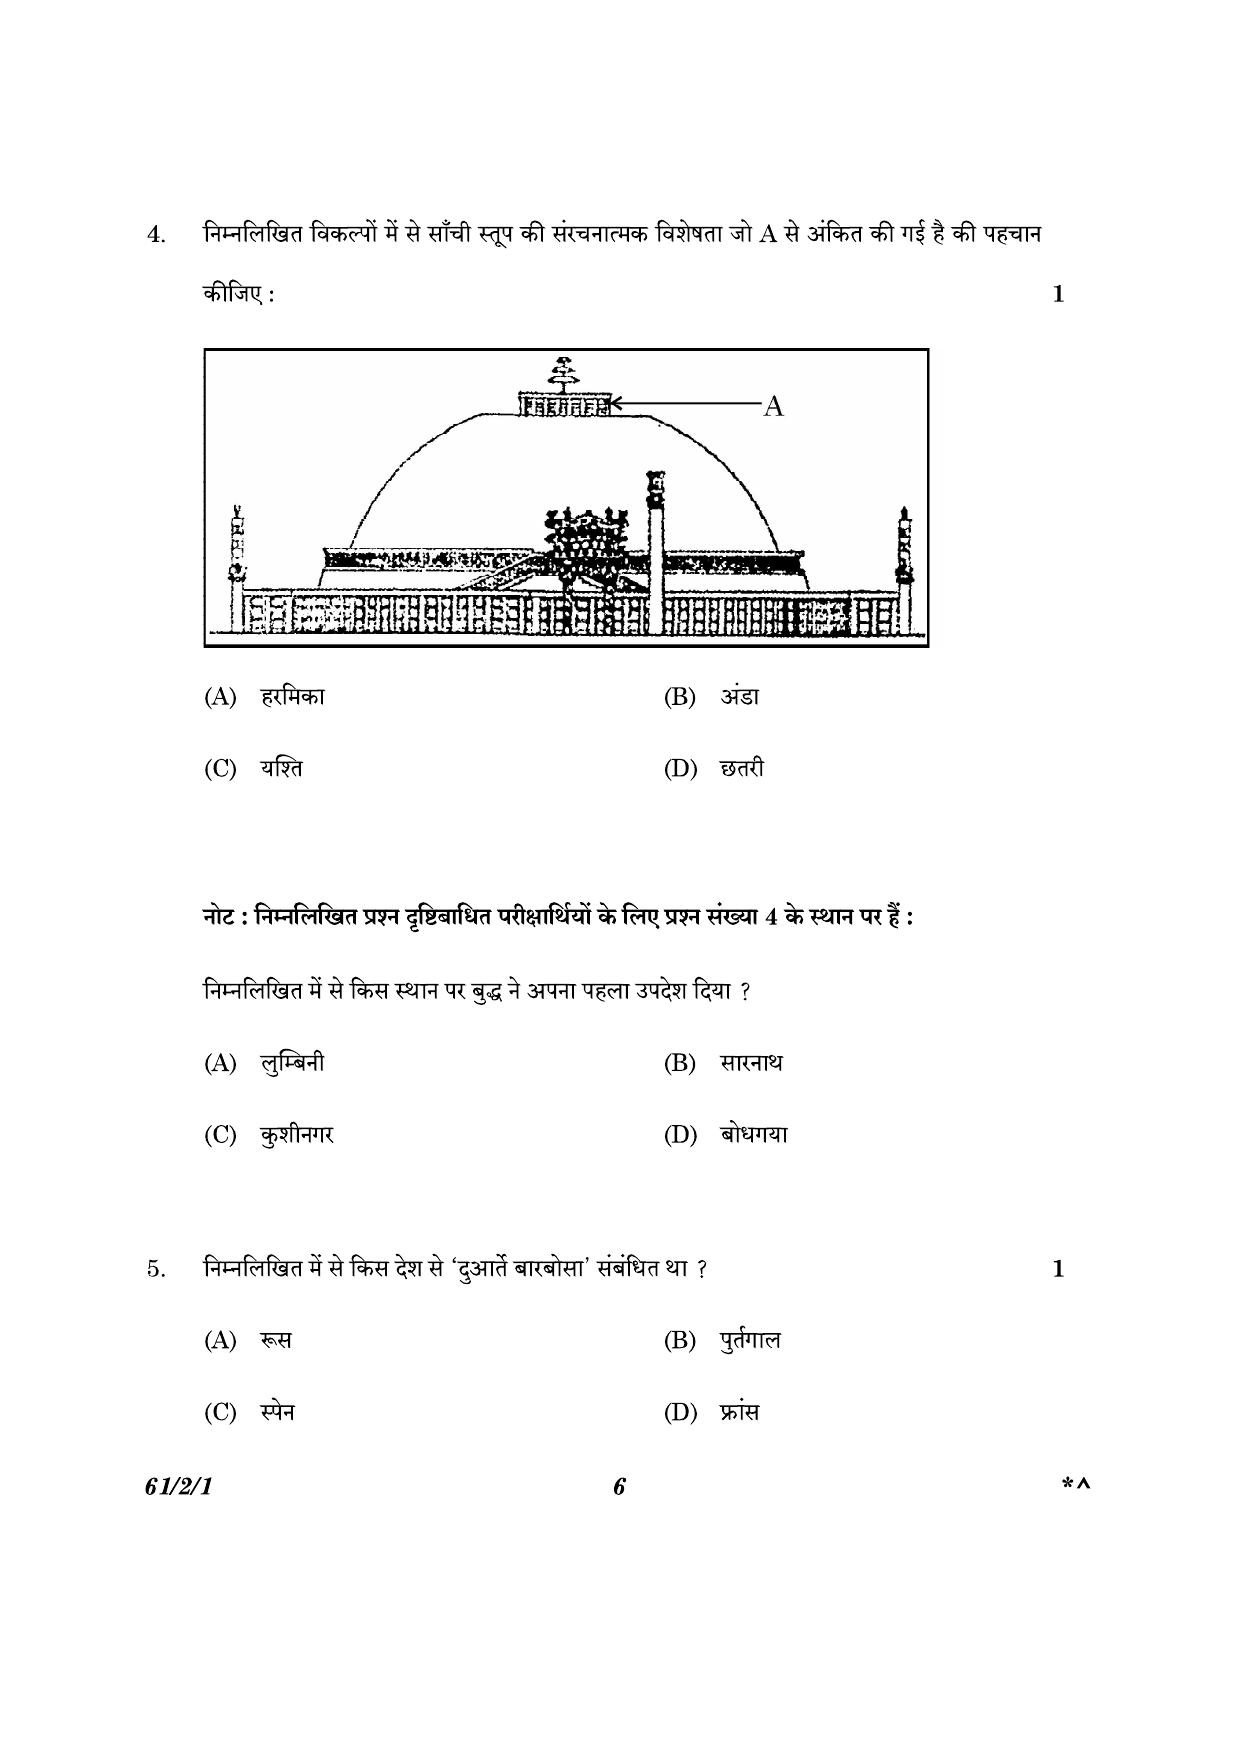 CBSE Class 12 61-2-1 History 2023 Question Paper - Page 6